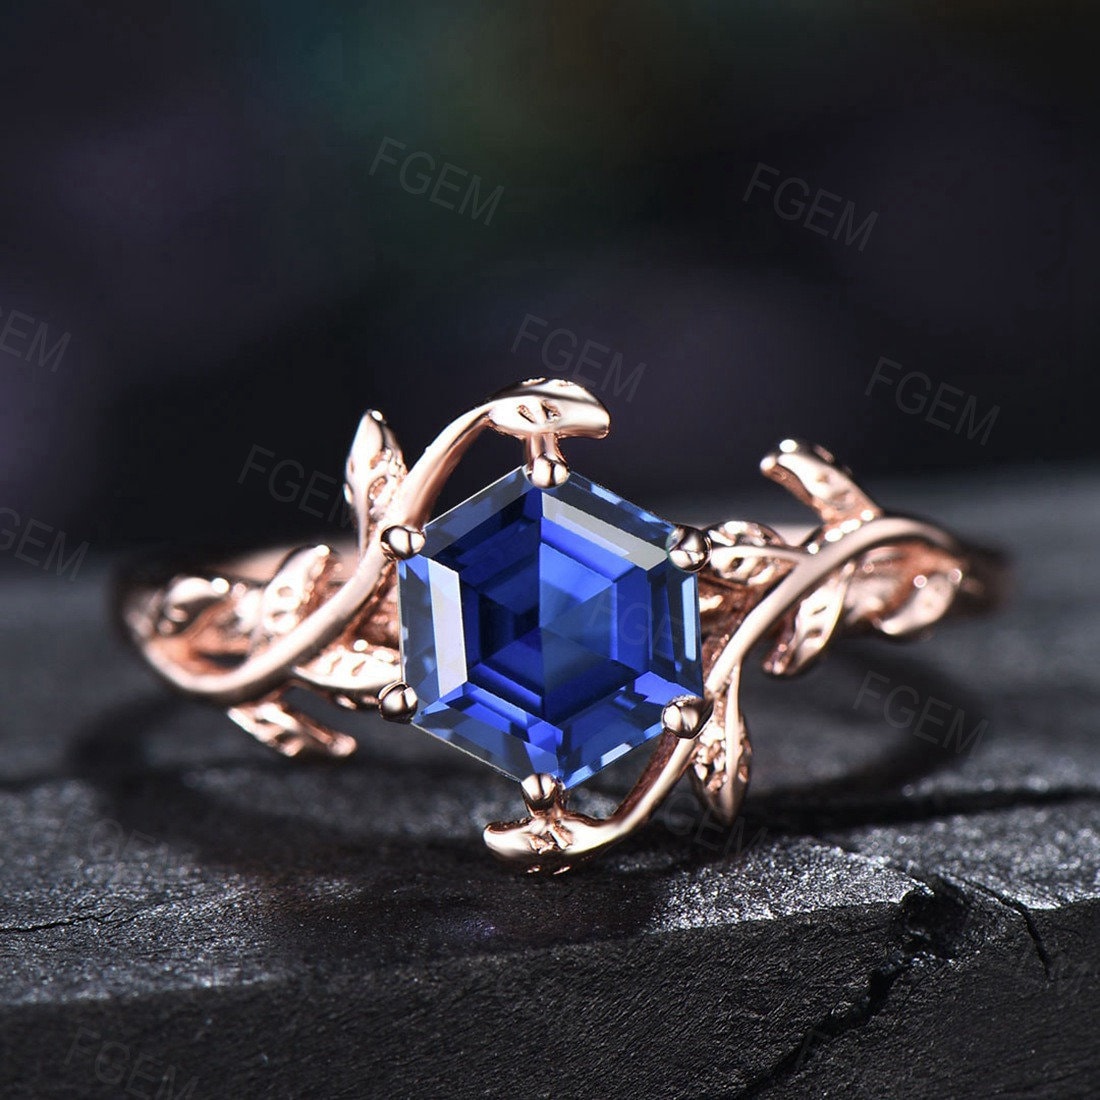 Sterling Silver Nature Inspired Blue Sapphire Leaf Engagement Ring Vintage 1ct Hexagon Cut Blue Sapphire Ring September Birthstone Jewelry